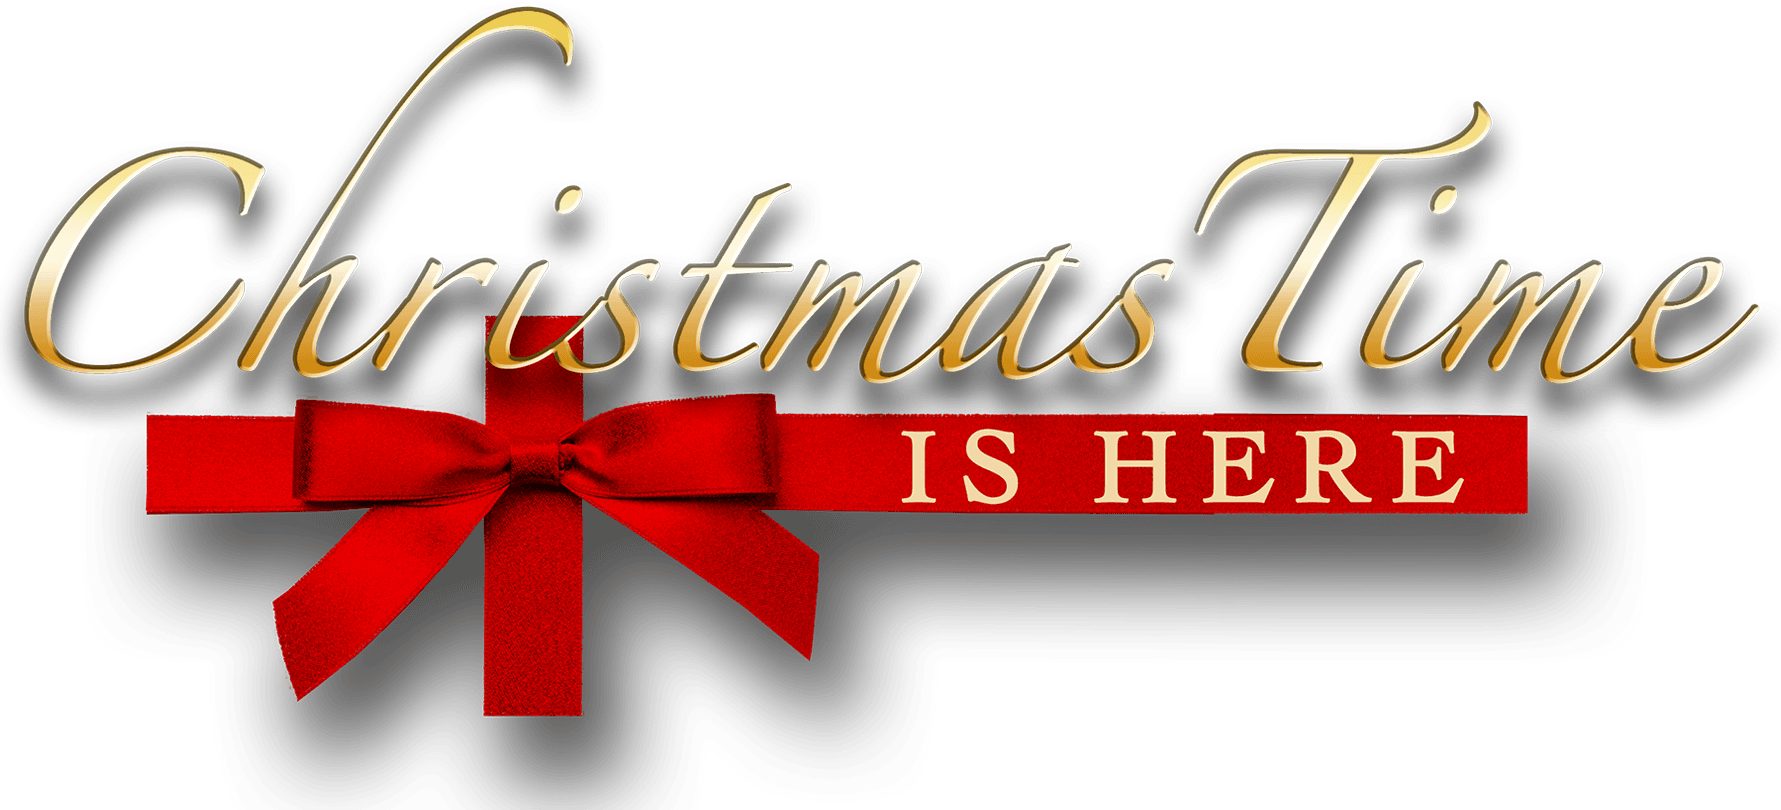 Christmas Time Is Here logo